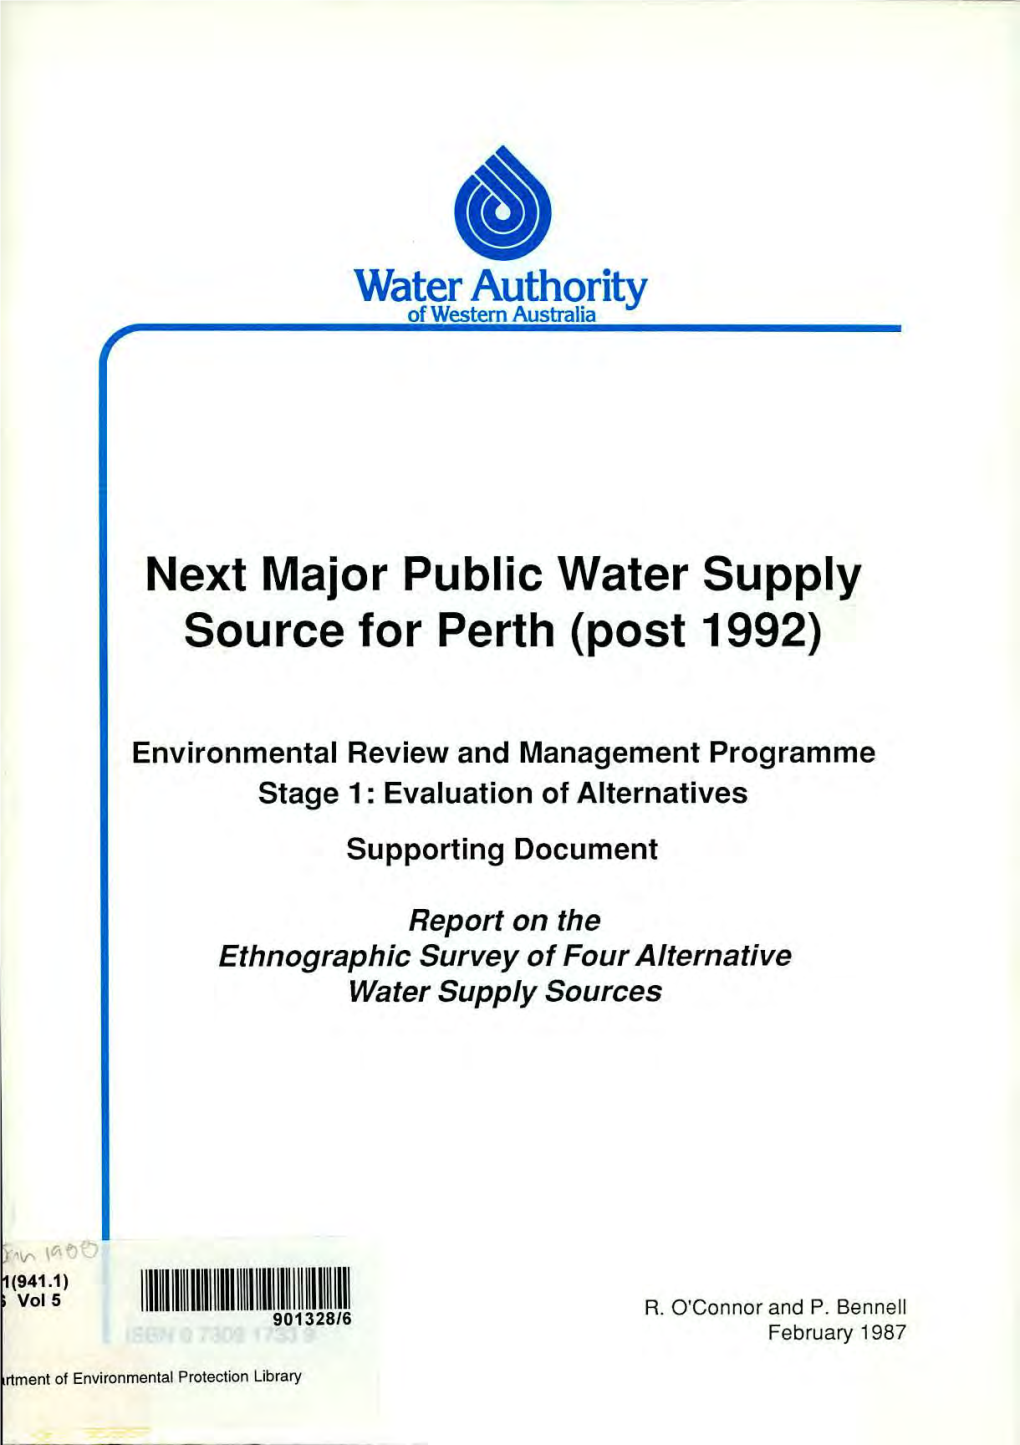 Water Authority Next Major Public Water Supply Source for Perth